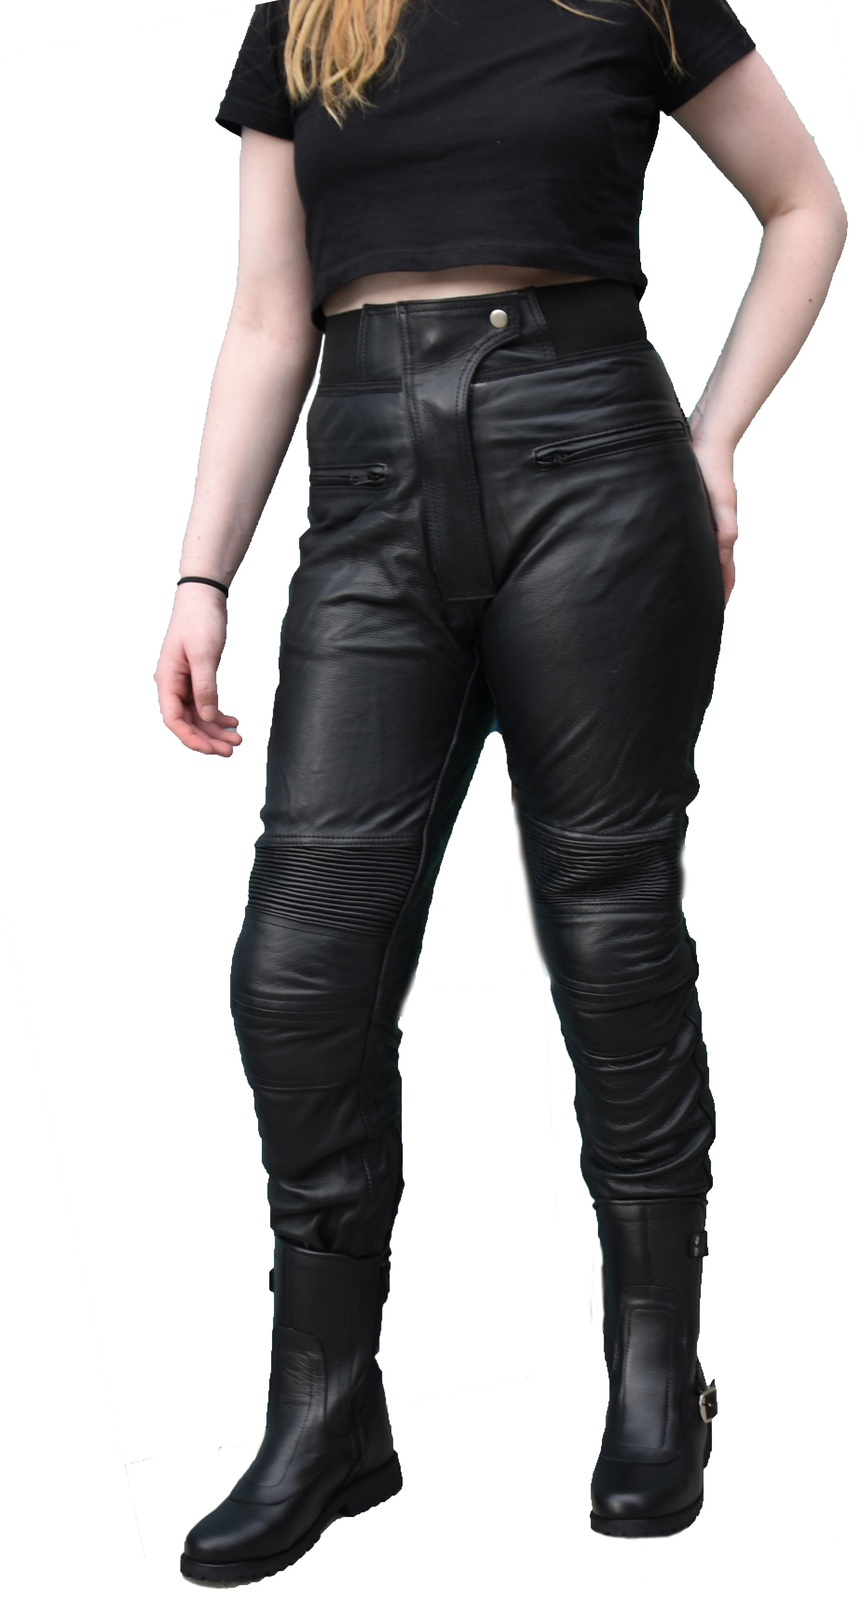 Richa Laura Ladies Leather Motorcycle Trousers  FREE UK DELIVERY  RETURNS   JTS Biker Clothing